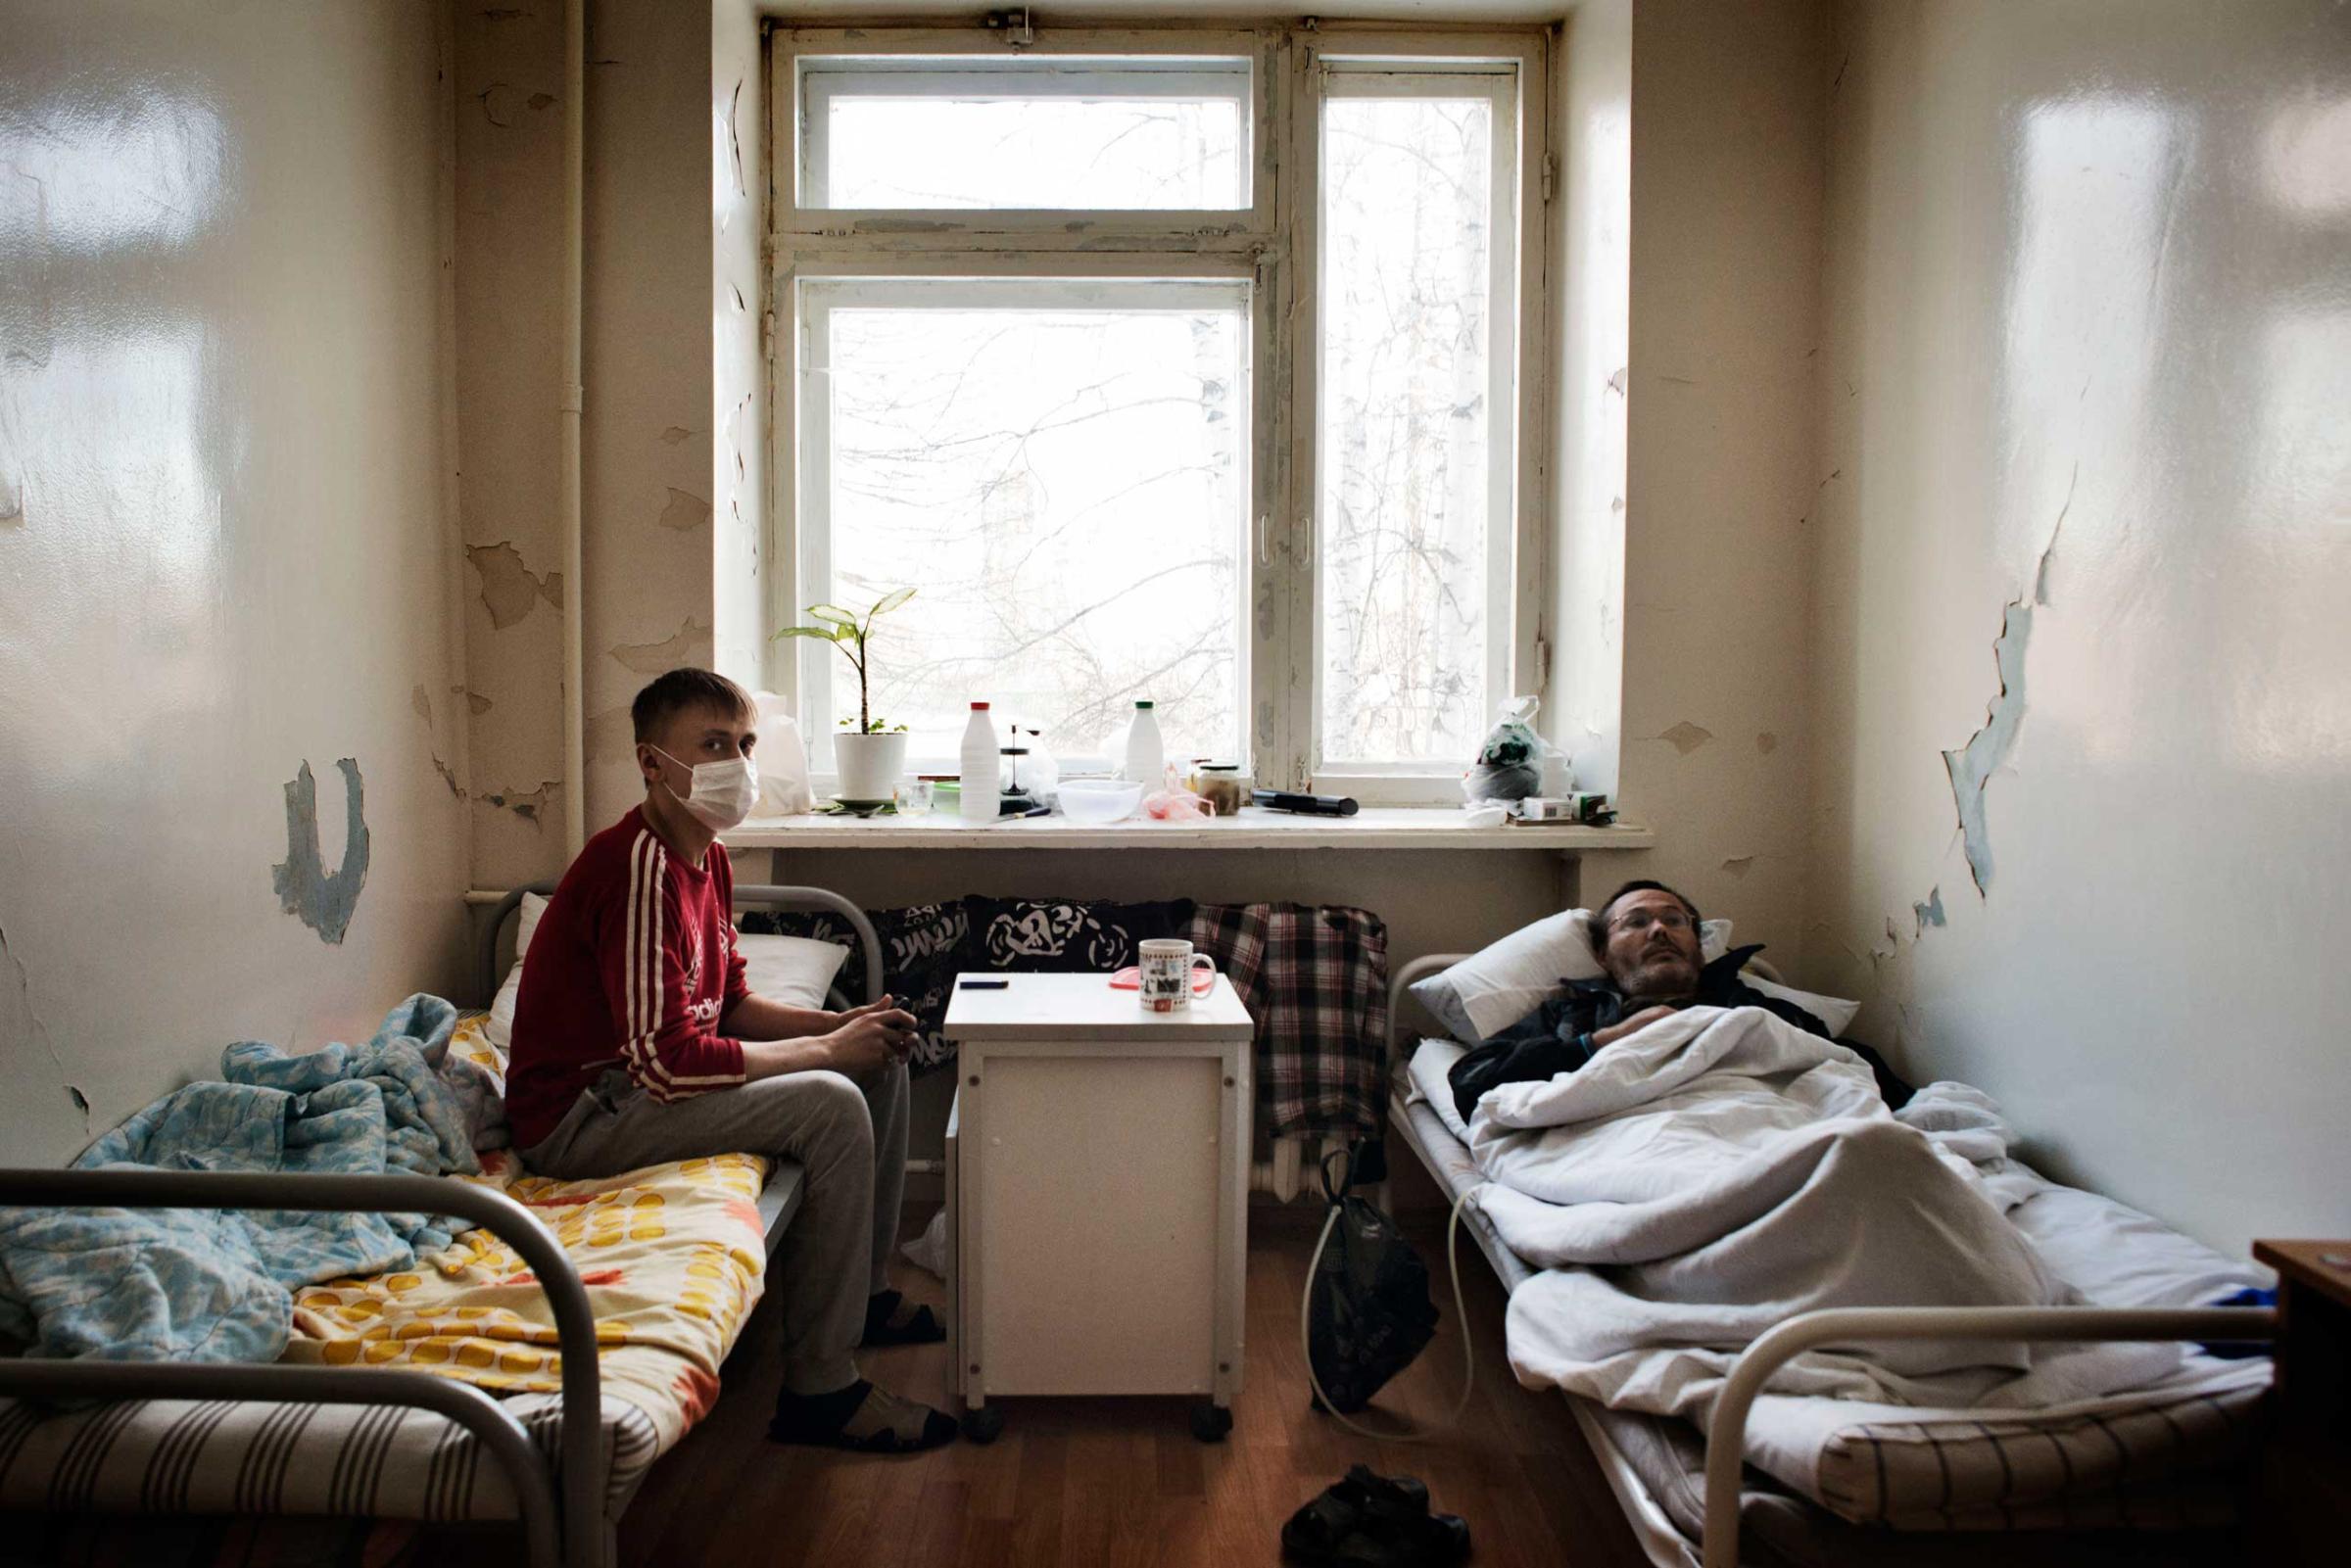 Andrey affected with tuberculosis lies in a hospital bed. The treatment he is undergoing is affecting seriously his liver already damaged from a long use of Krokodil.